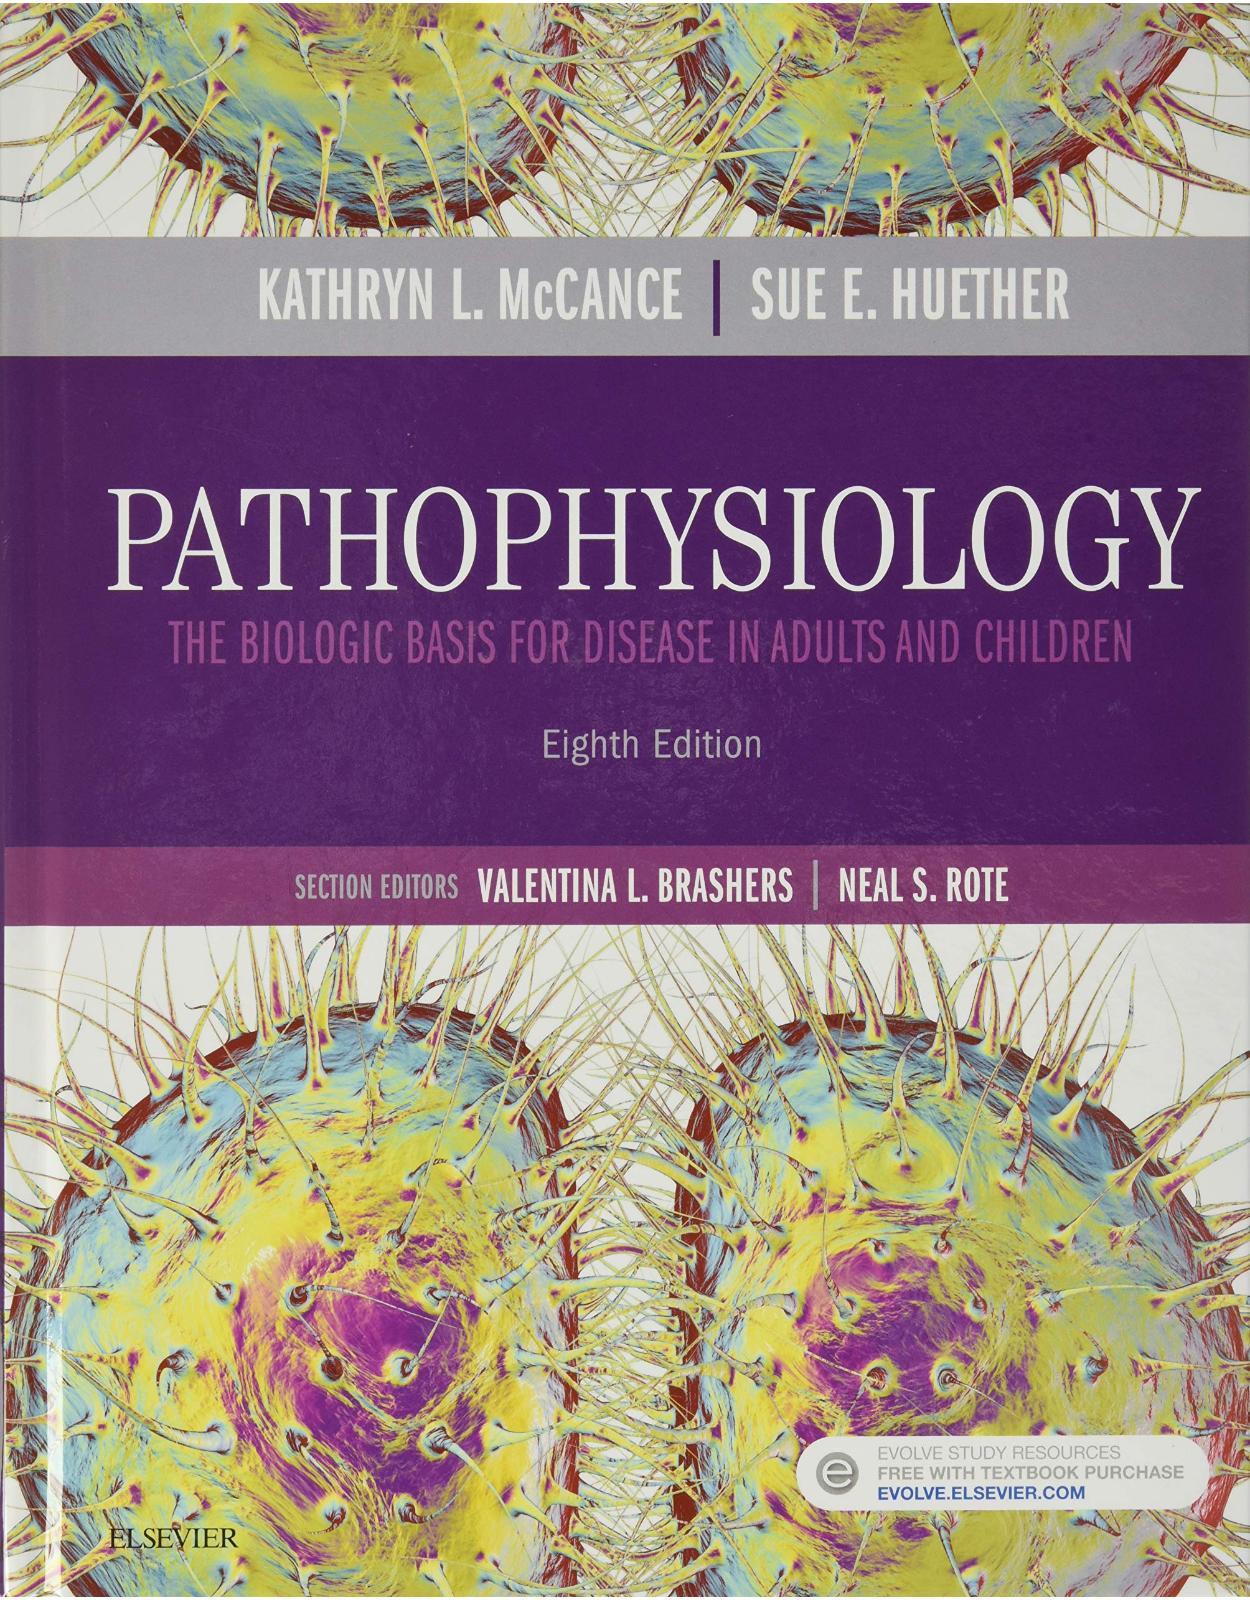 Pathophysiology: The Biologic Basis for Disease in Adults and Children, 8e